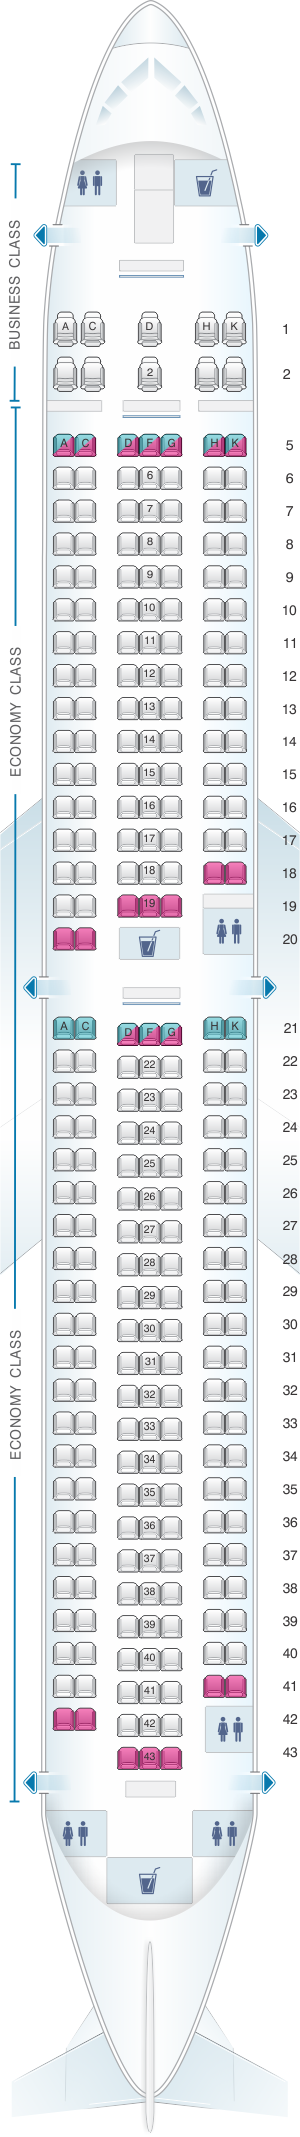 Seat map for ANA - All Nippon Airways Boeing B767 300 domestic